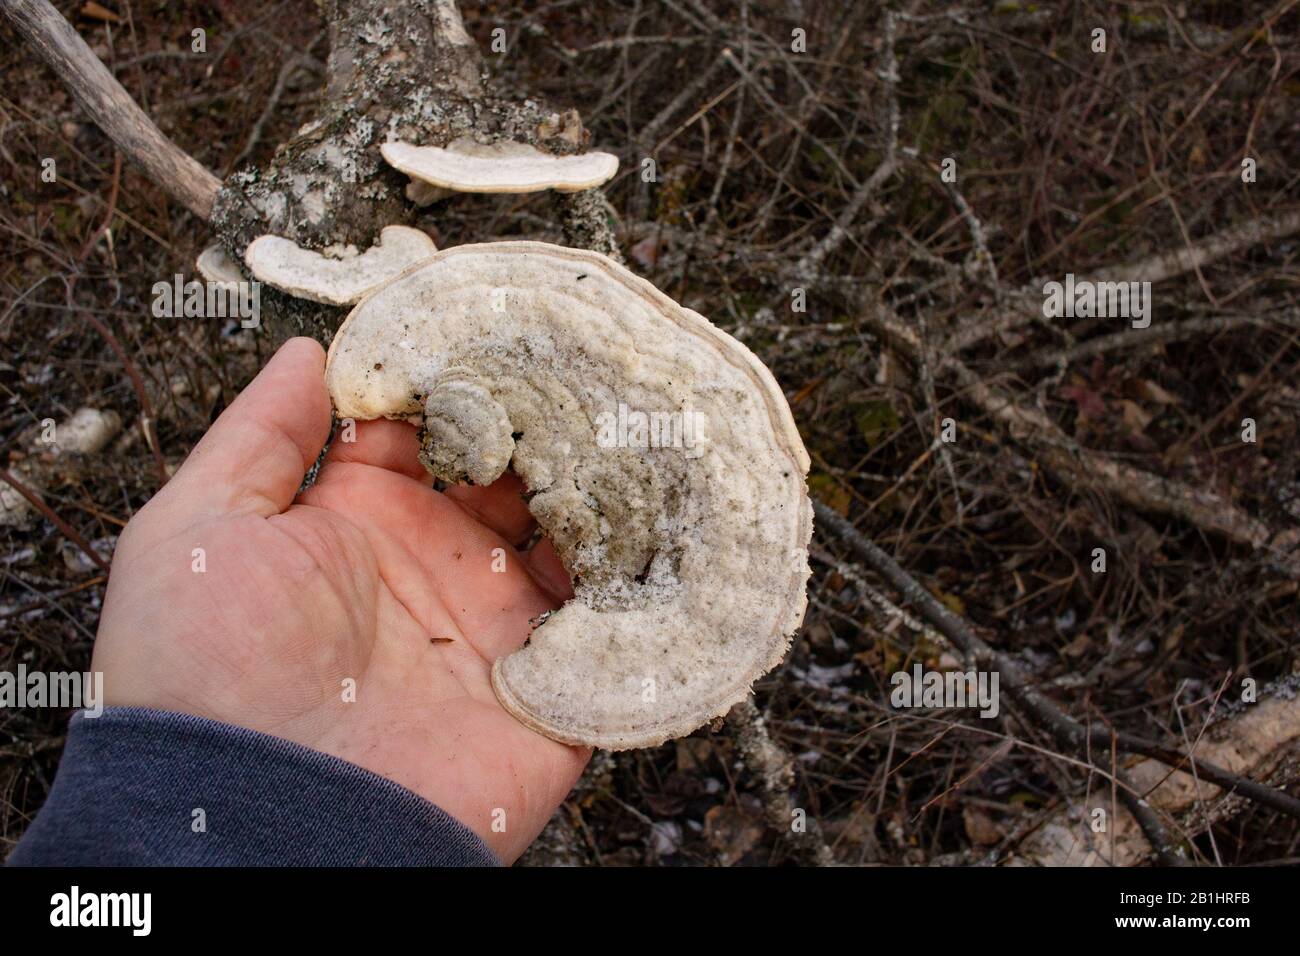 Holding a hairy bracket mushroom (Trametes hirsuta), showing the details.The mushroom was found growing on a red birch stump (Betula occidentalis), so Stock Photo